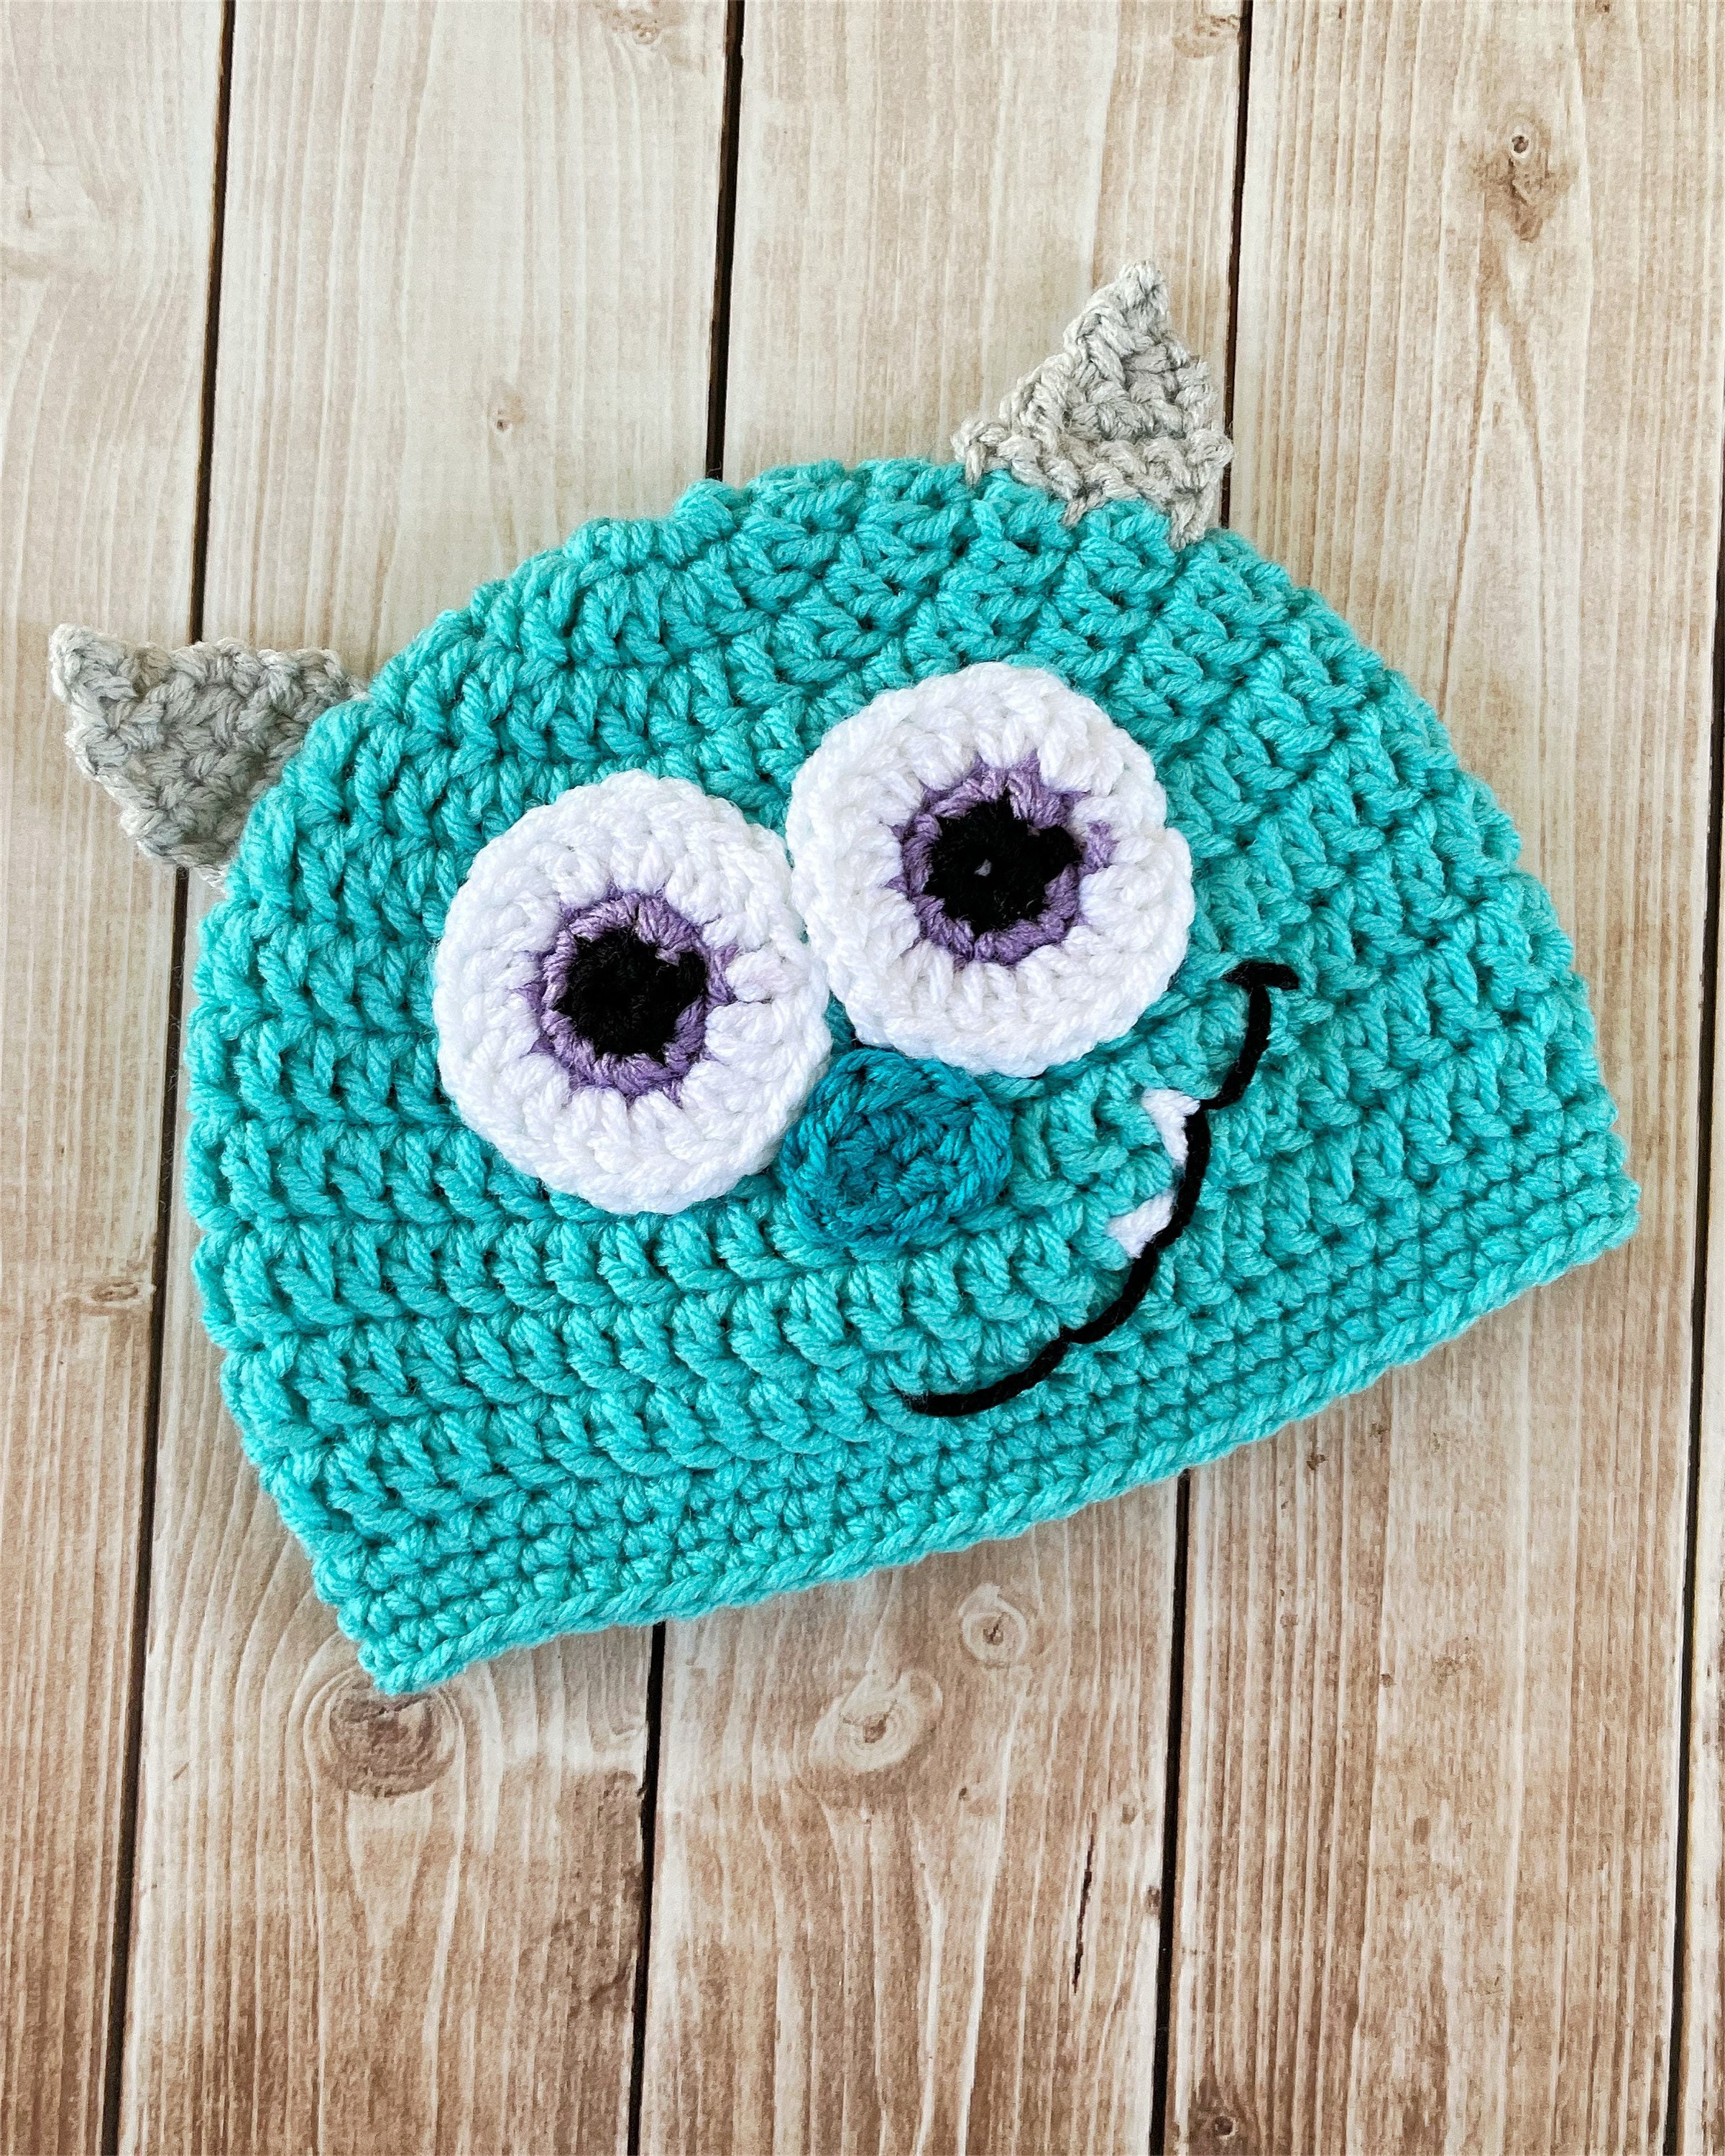 Sully Monsters Inc Inspired Hat/ Crochet Sully Hat/ Available in